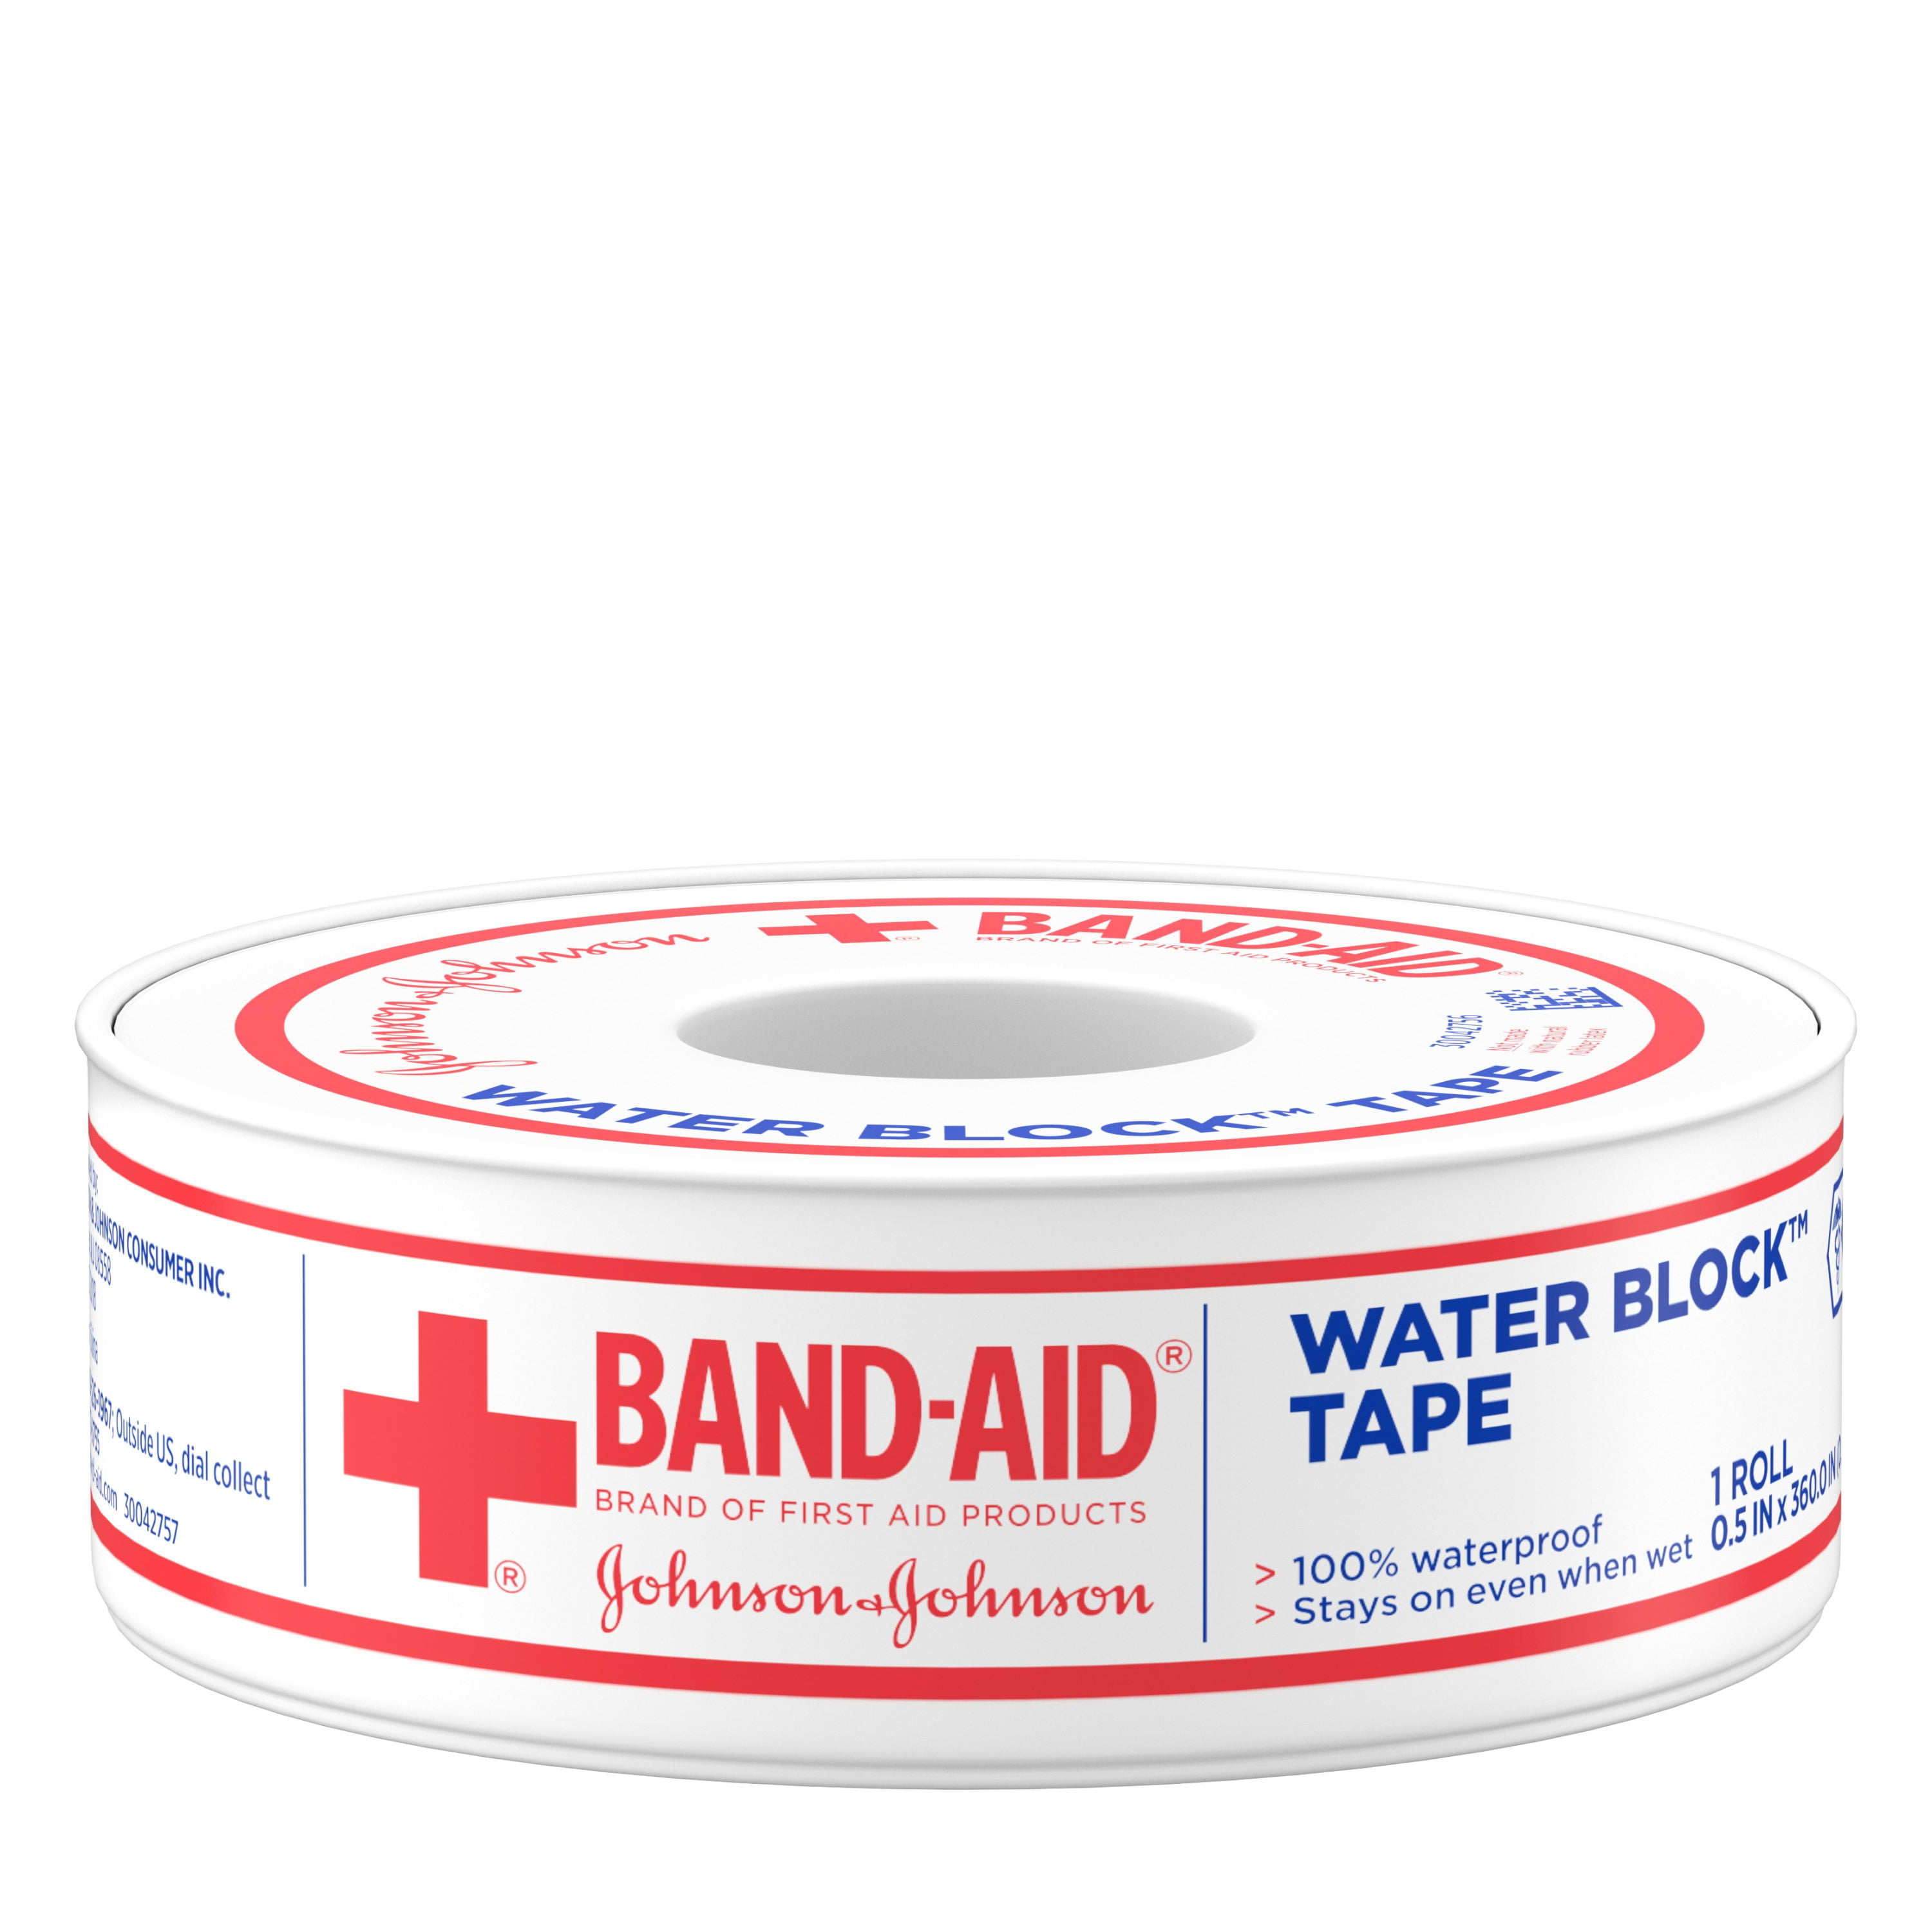 Band-Aid Brand of First Aid Products 100% Waterproof Self-Adhesive Medical  Tape Roll to Secure Bandages, Durable First Aid Wound Care Bandaging Tape,  1 Inch by 10 Yards (Pack of 2) 2 Count (Pack of 1)